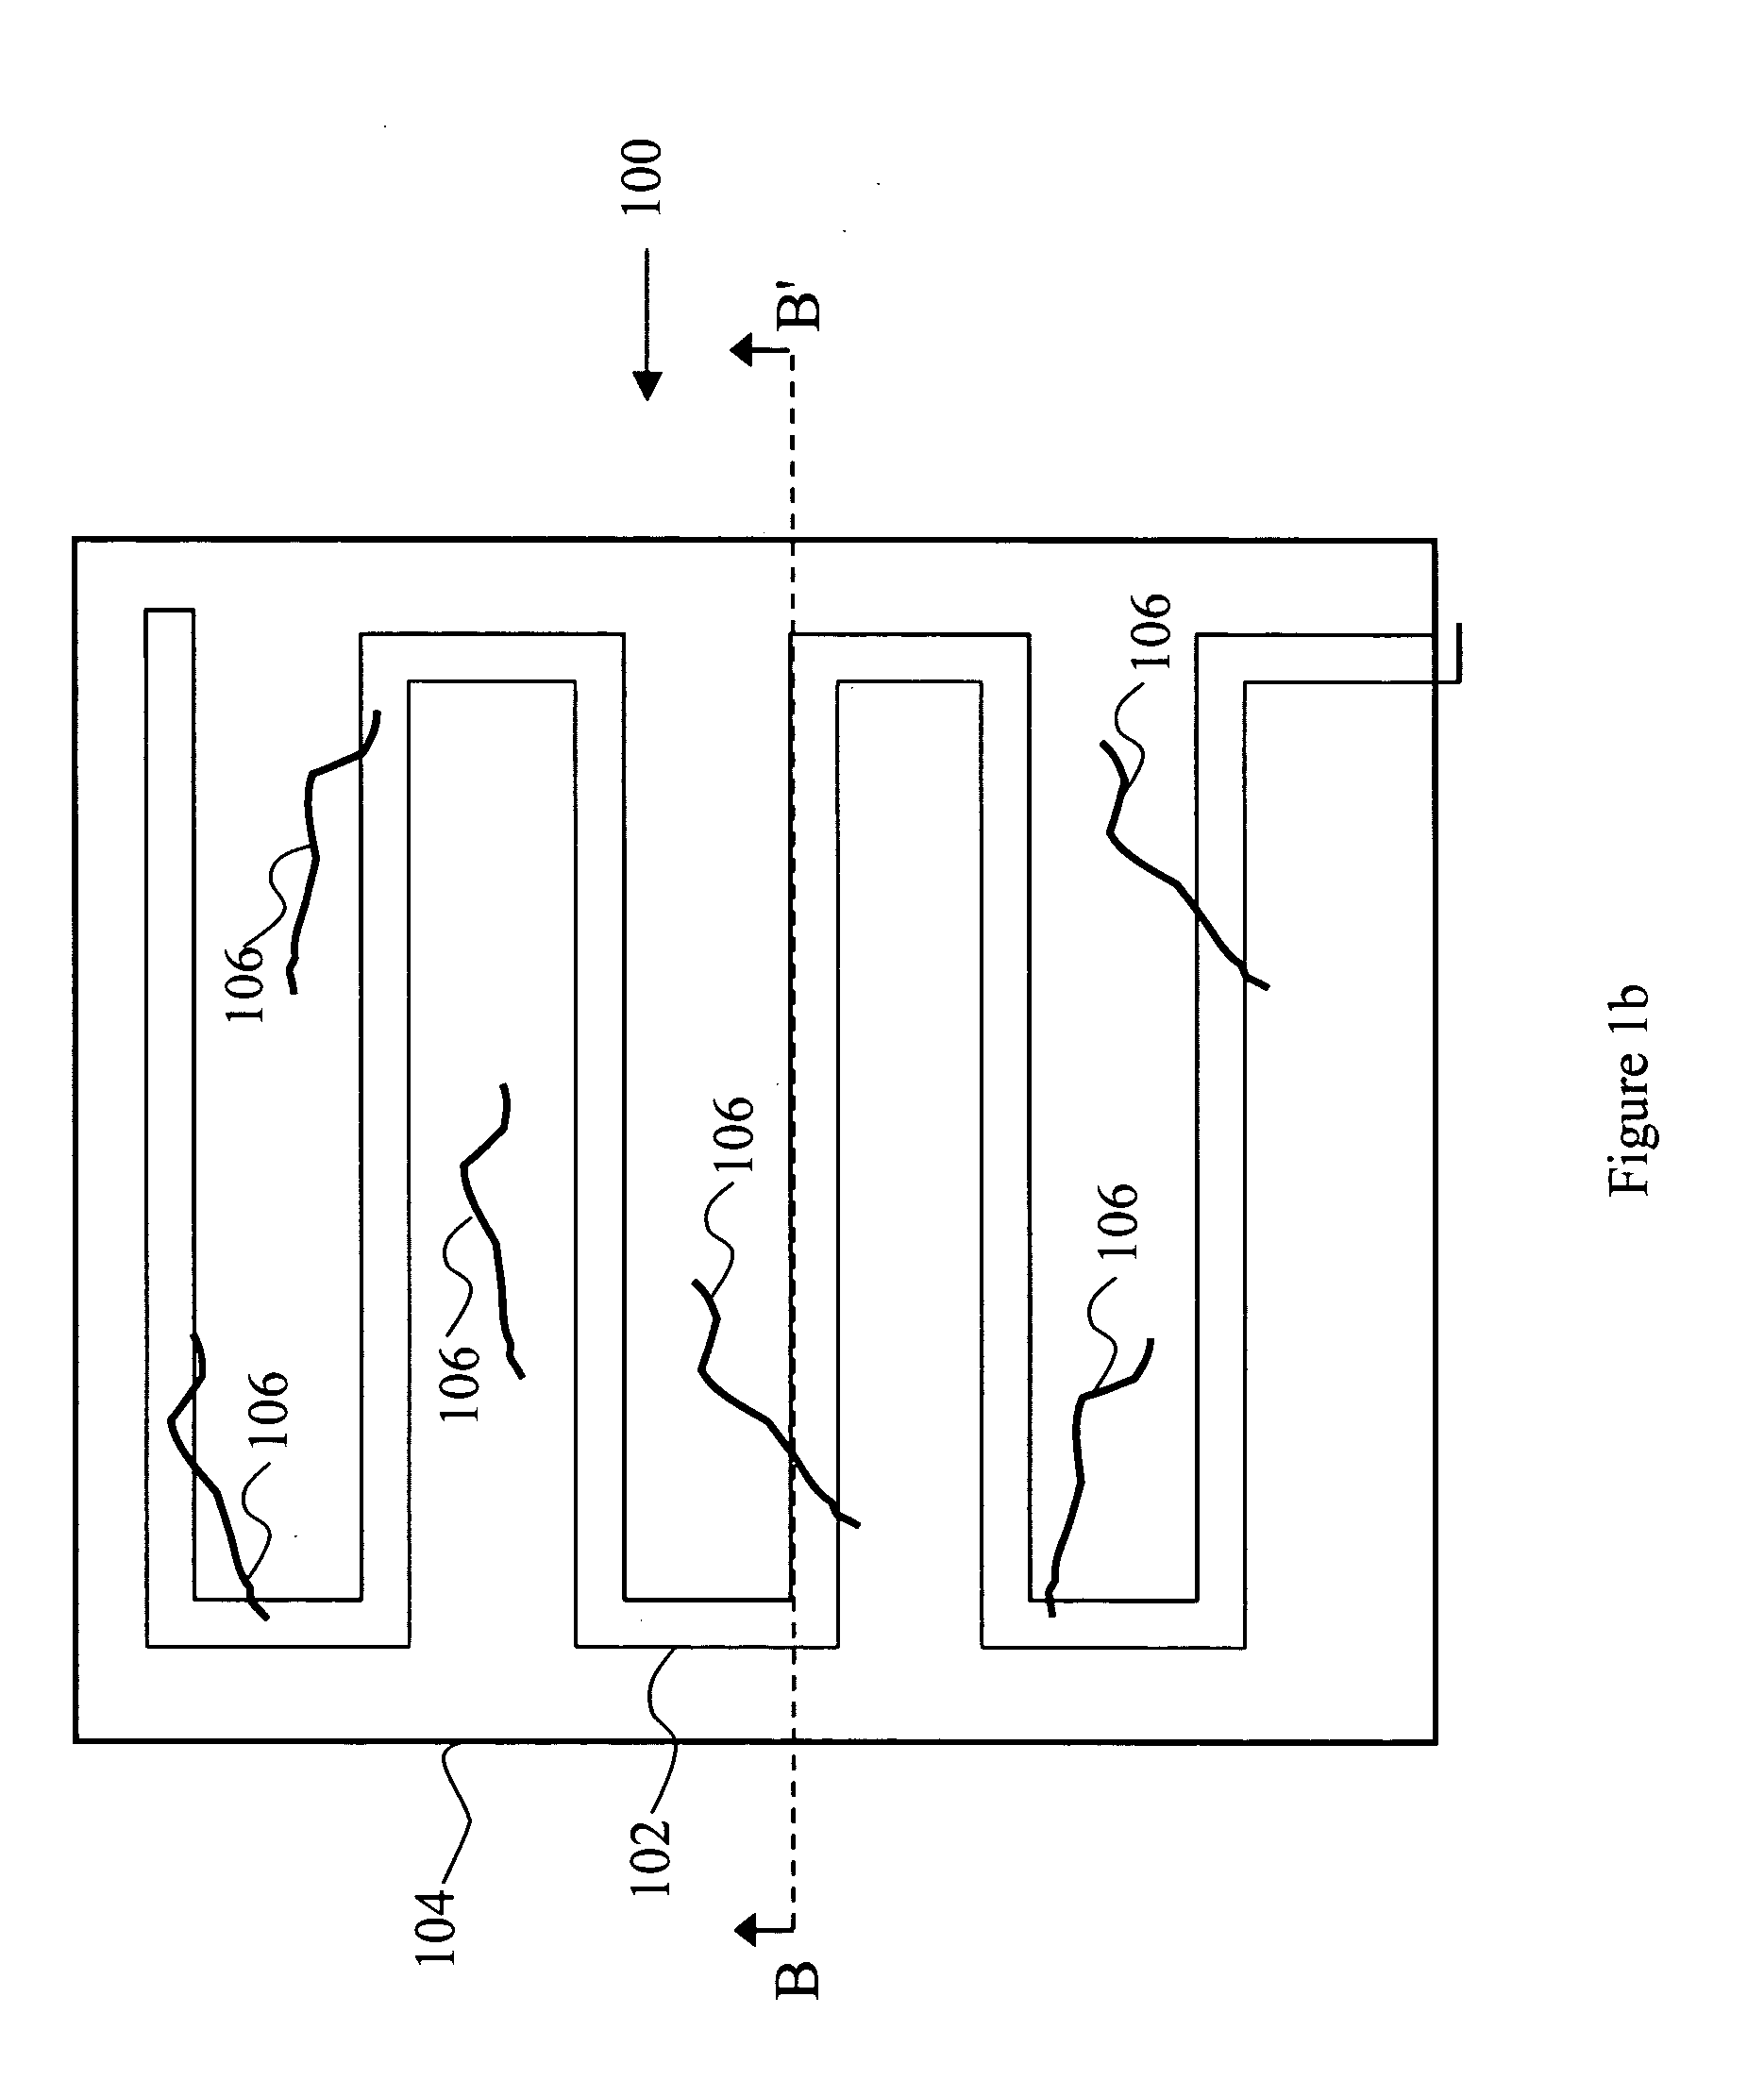 Method and system for determining cracks and broken components in armor